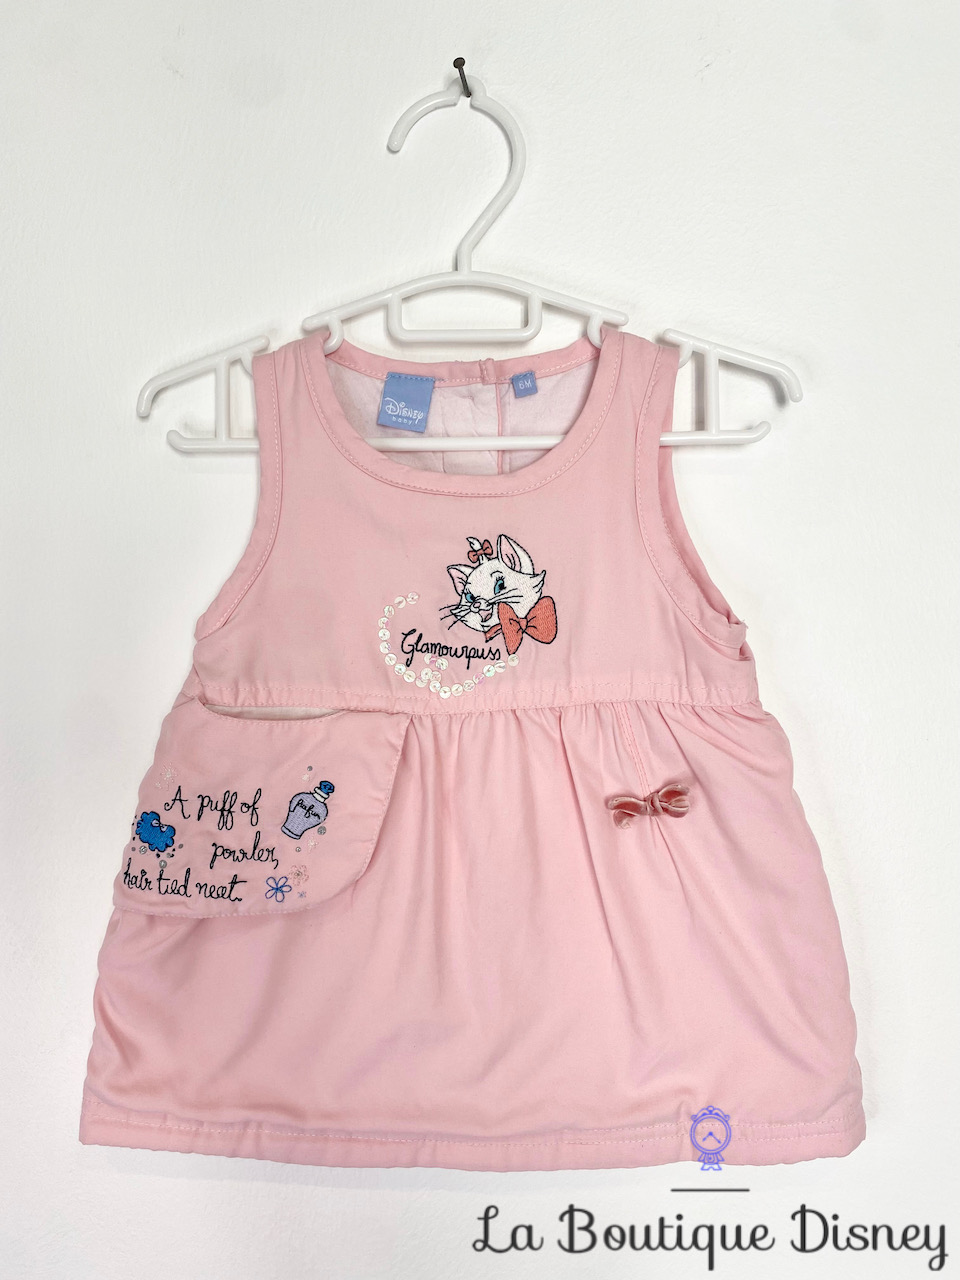 Robe Marie Les Aristochats Disney Baby taille 6 mois rose Glamourouss